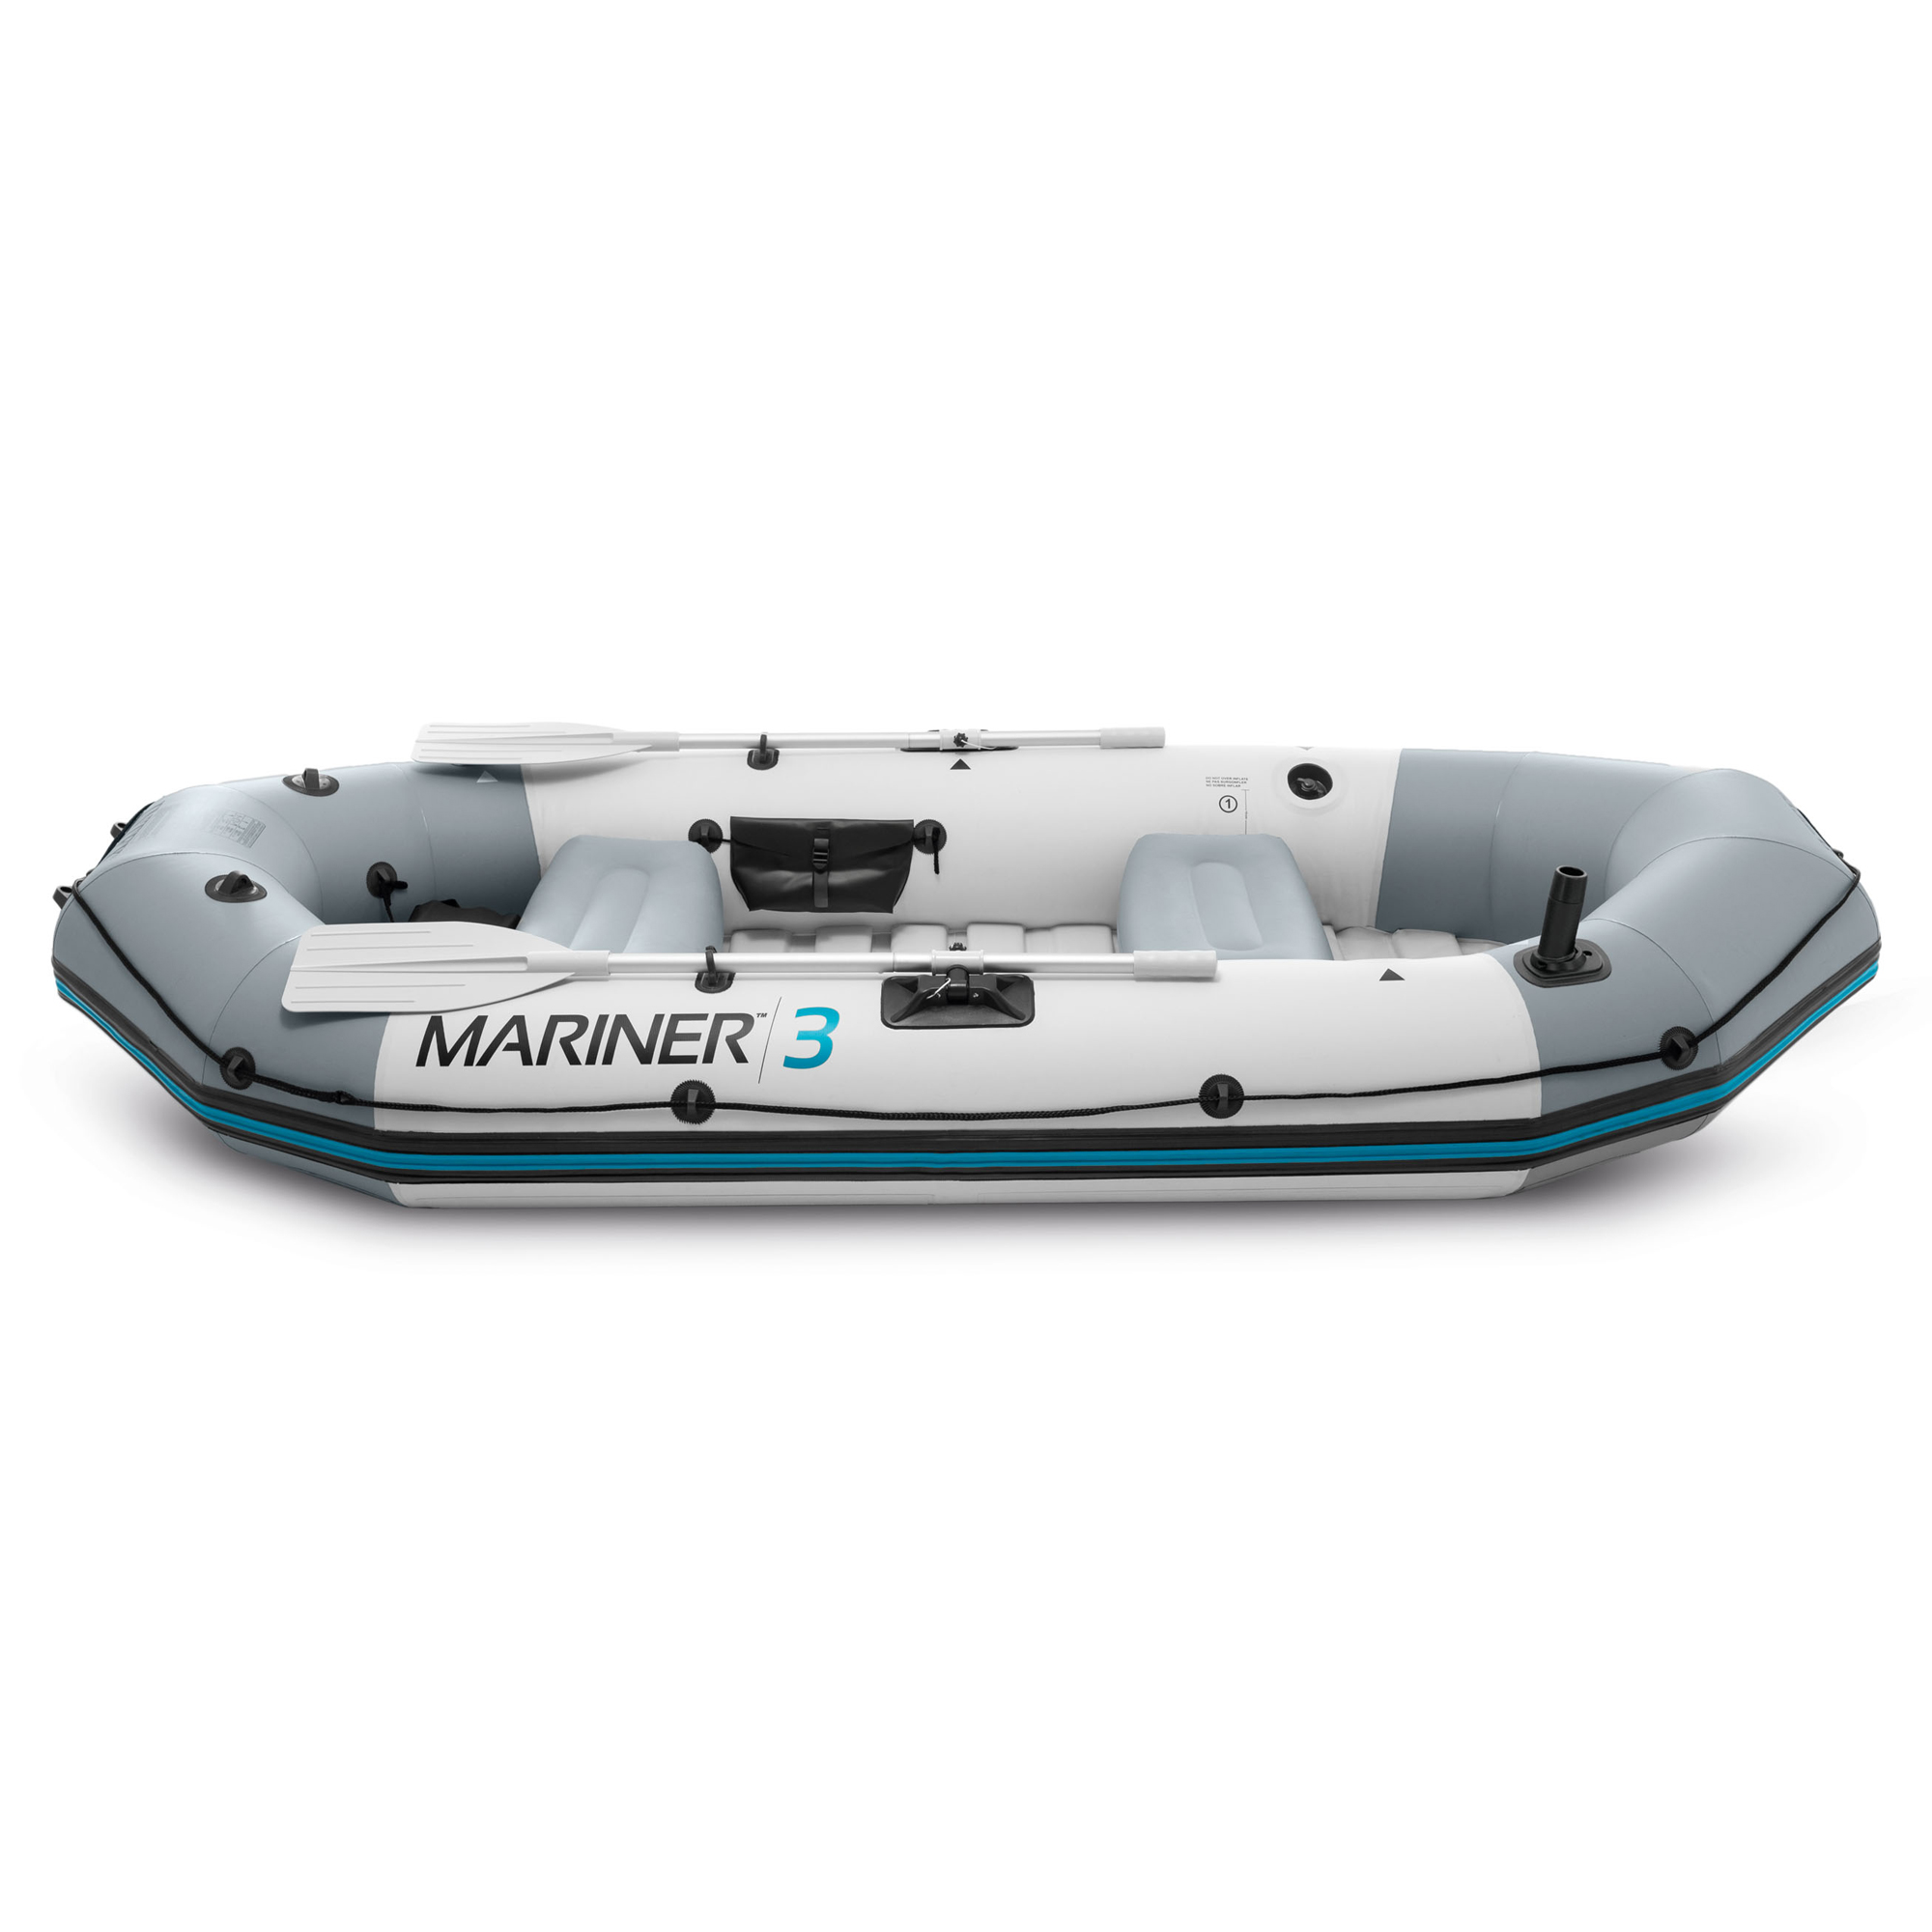 Intex Mariner 3, 3-Person Inflatable River/Lake Dinghy Boat & Oars Set - image 4 of 12